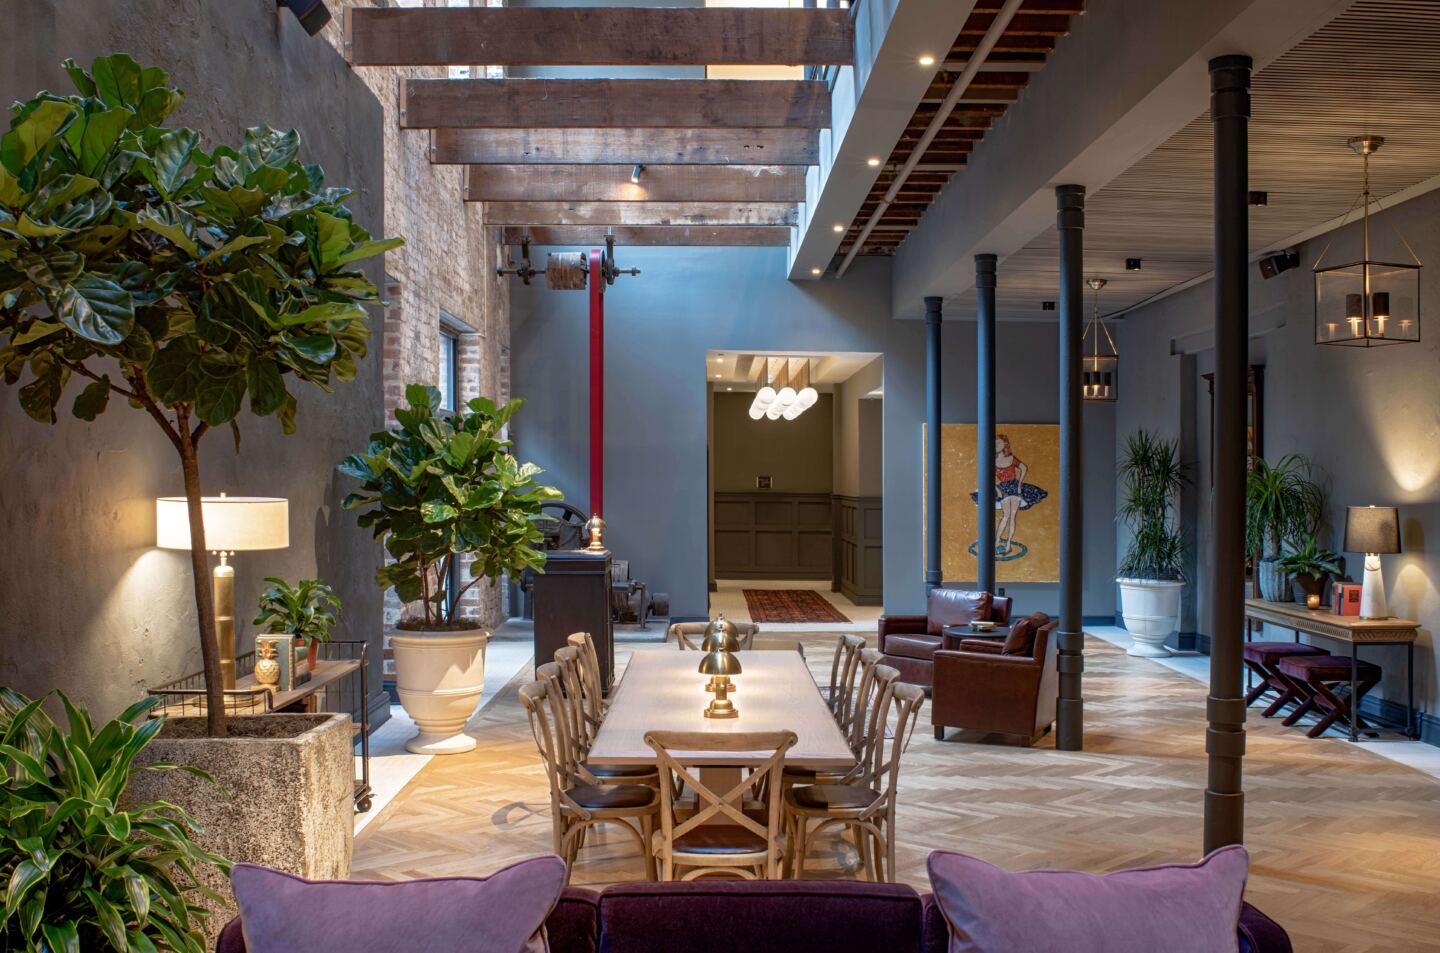 The lobby of the Eliza Jane Hotel in New Orleans 